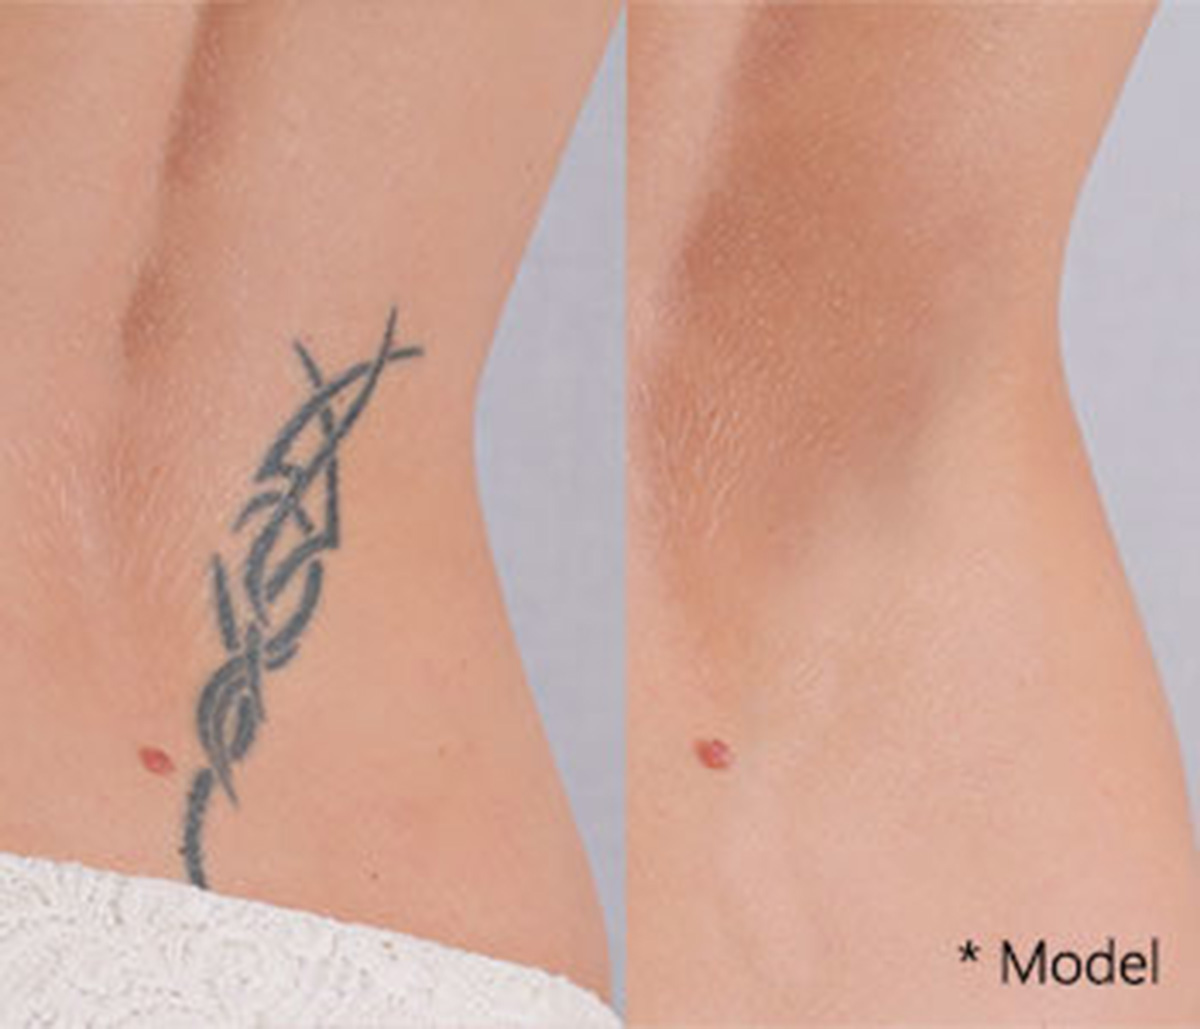 PicoSure tattoo removal near Beverly Hills